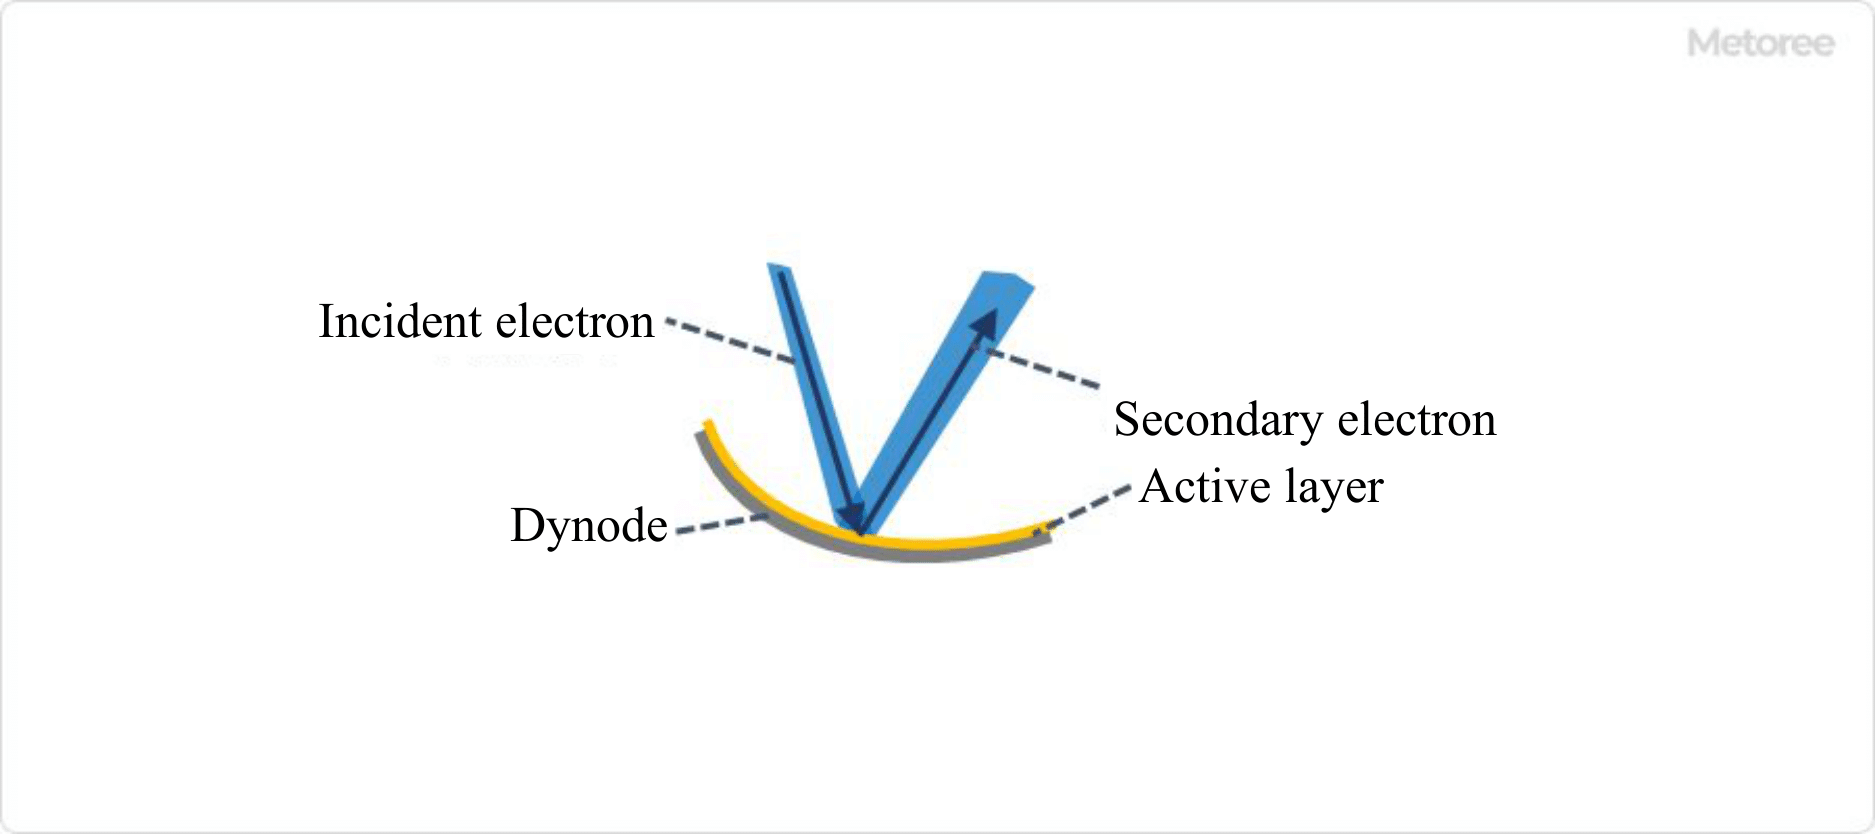 Figure 3. Structure and function of dynode (image)